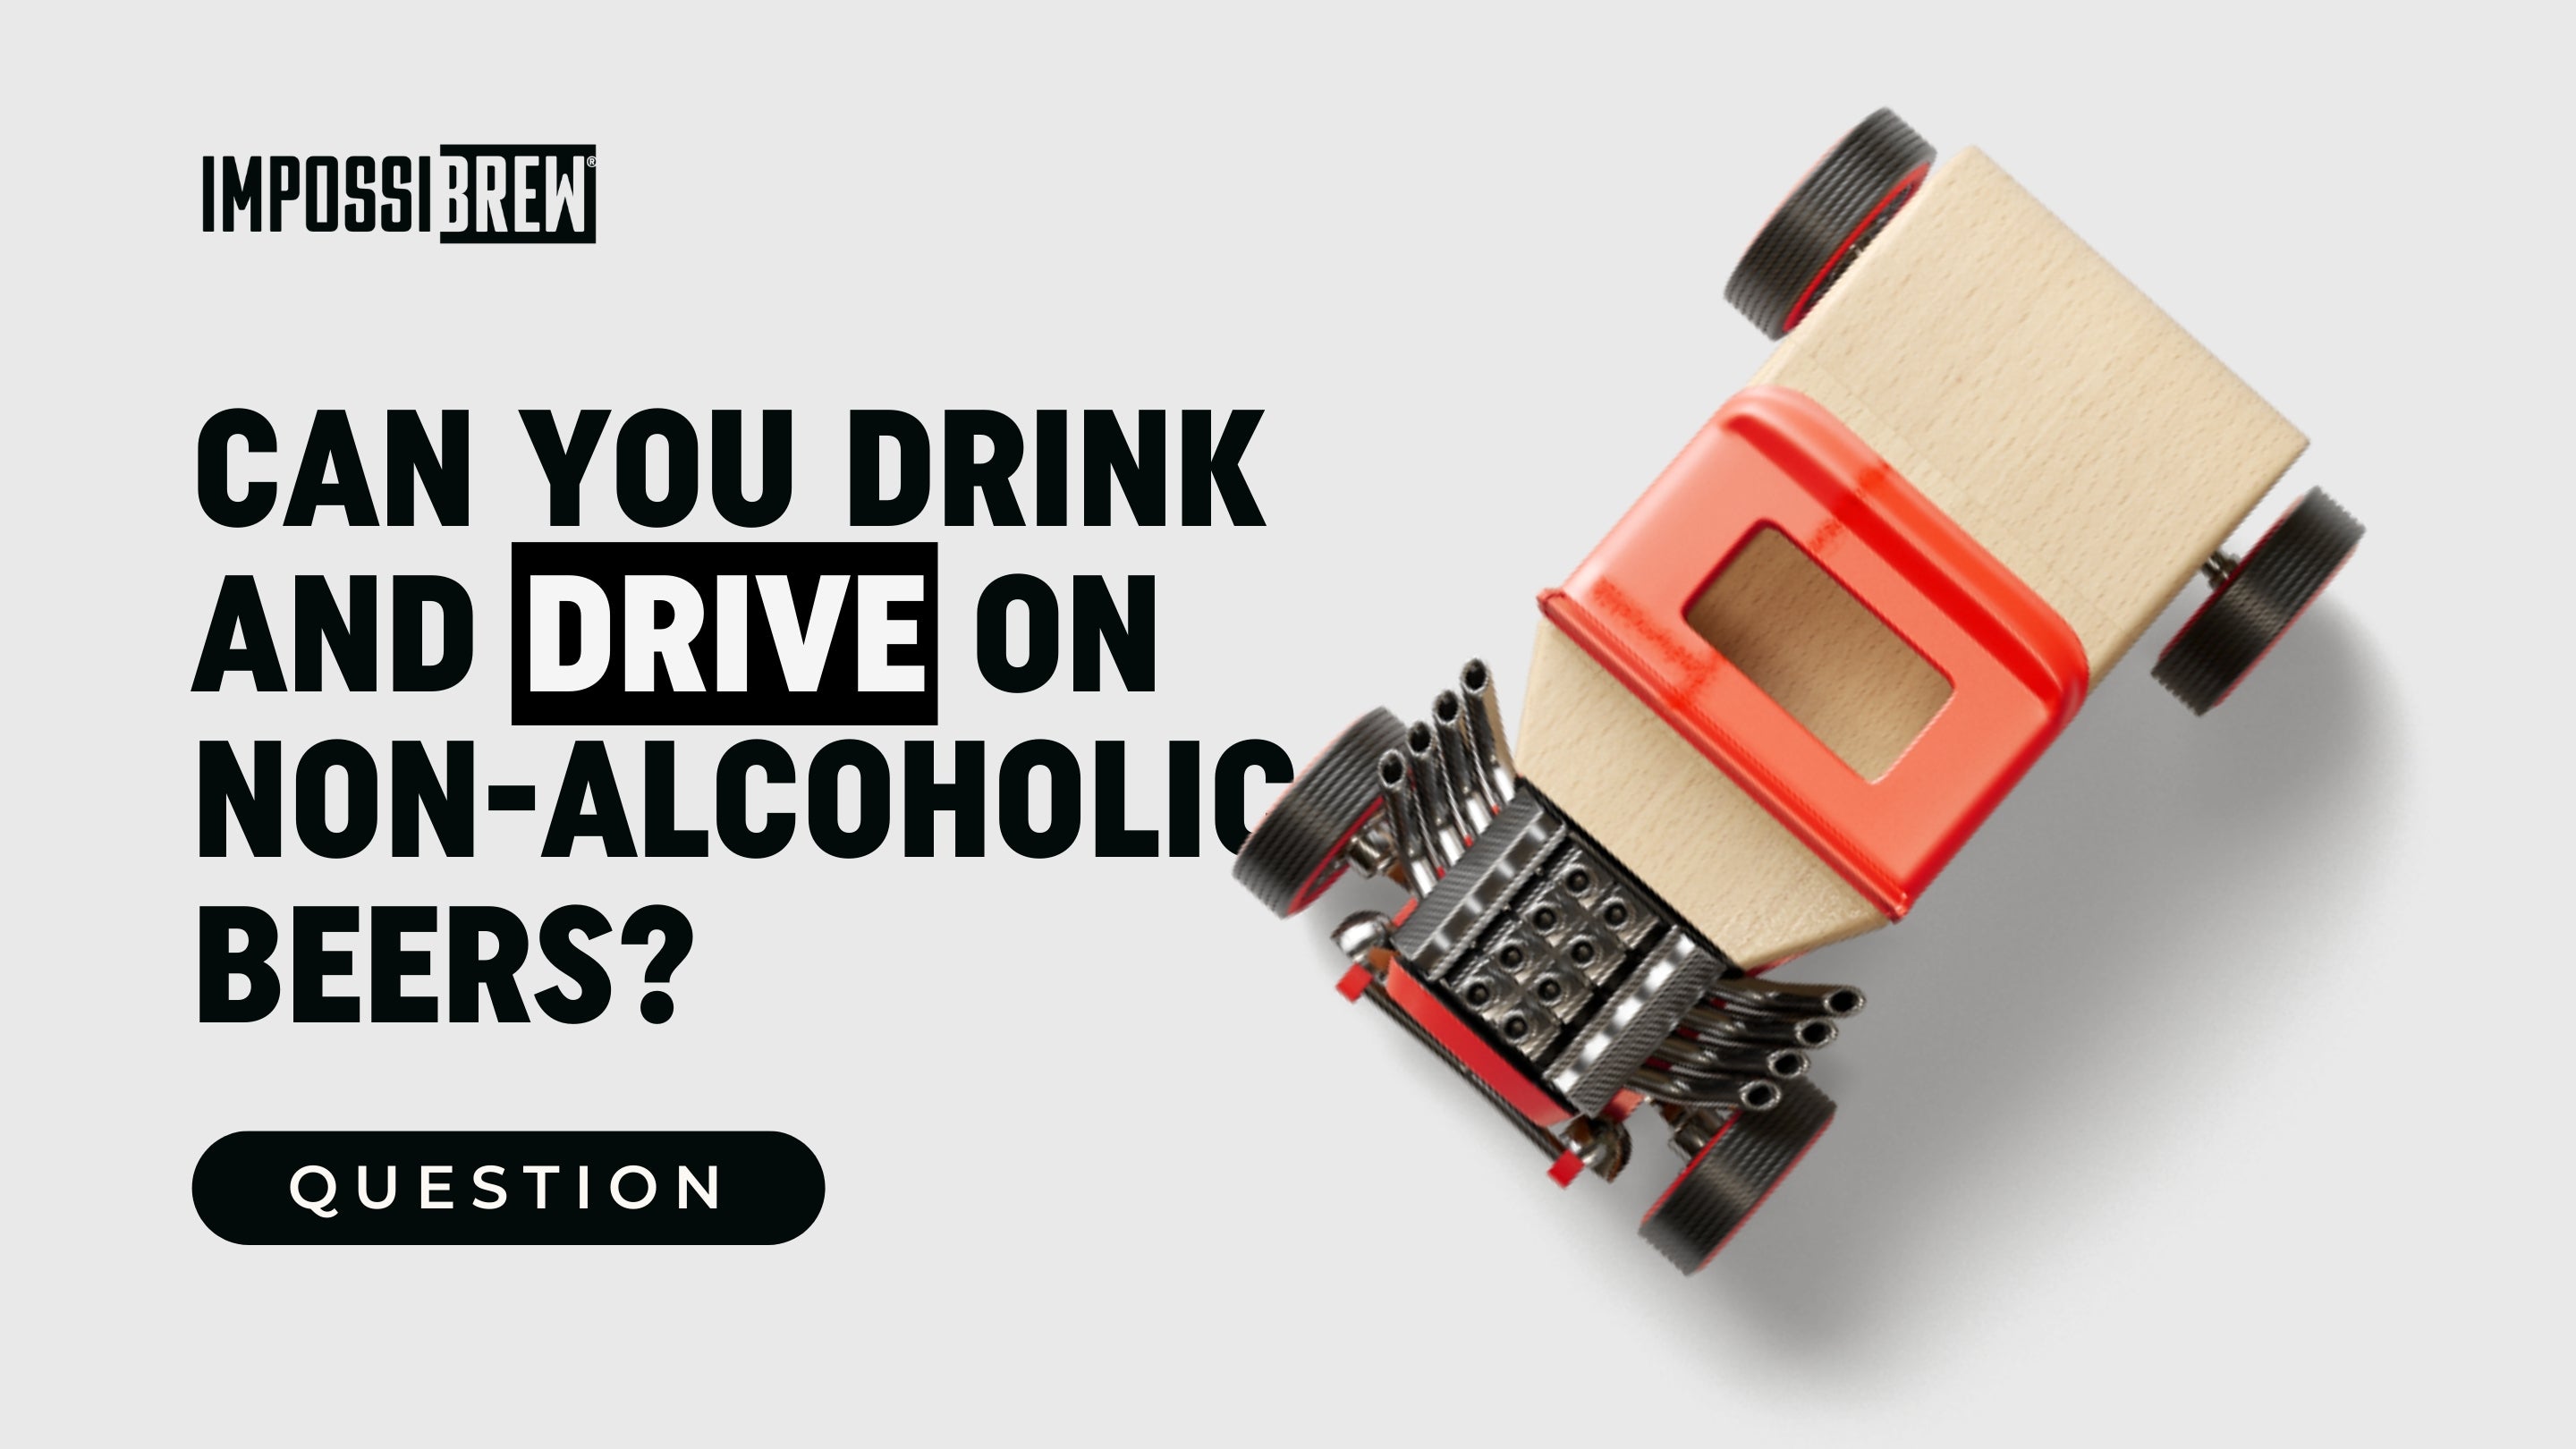 Can You Actually Drink And Drive On Non-Alcoholic Beers?